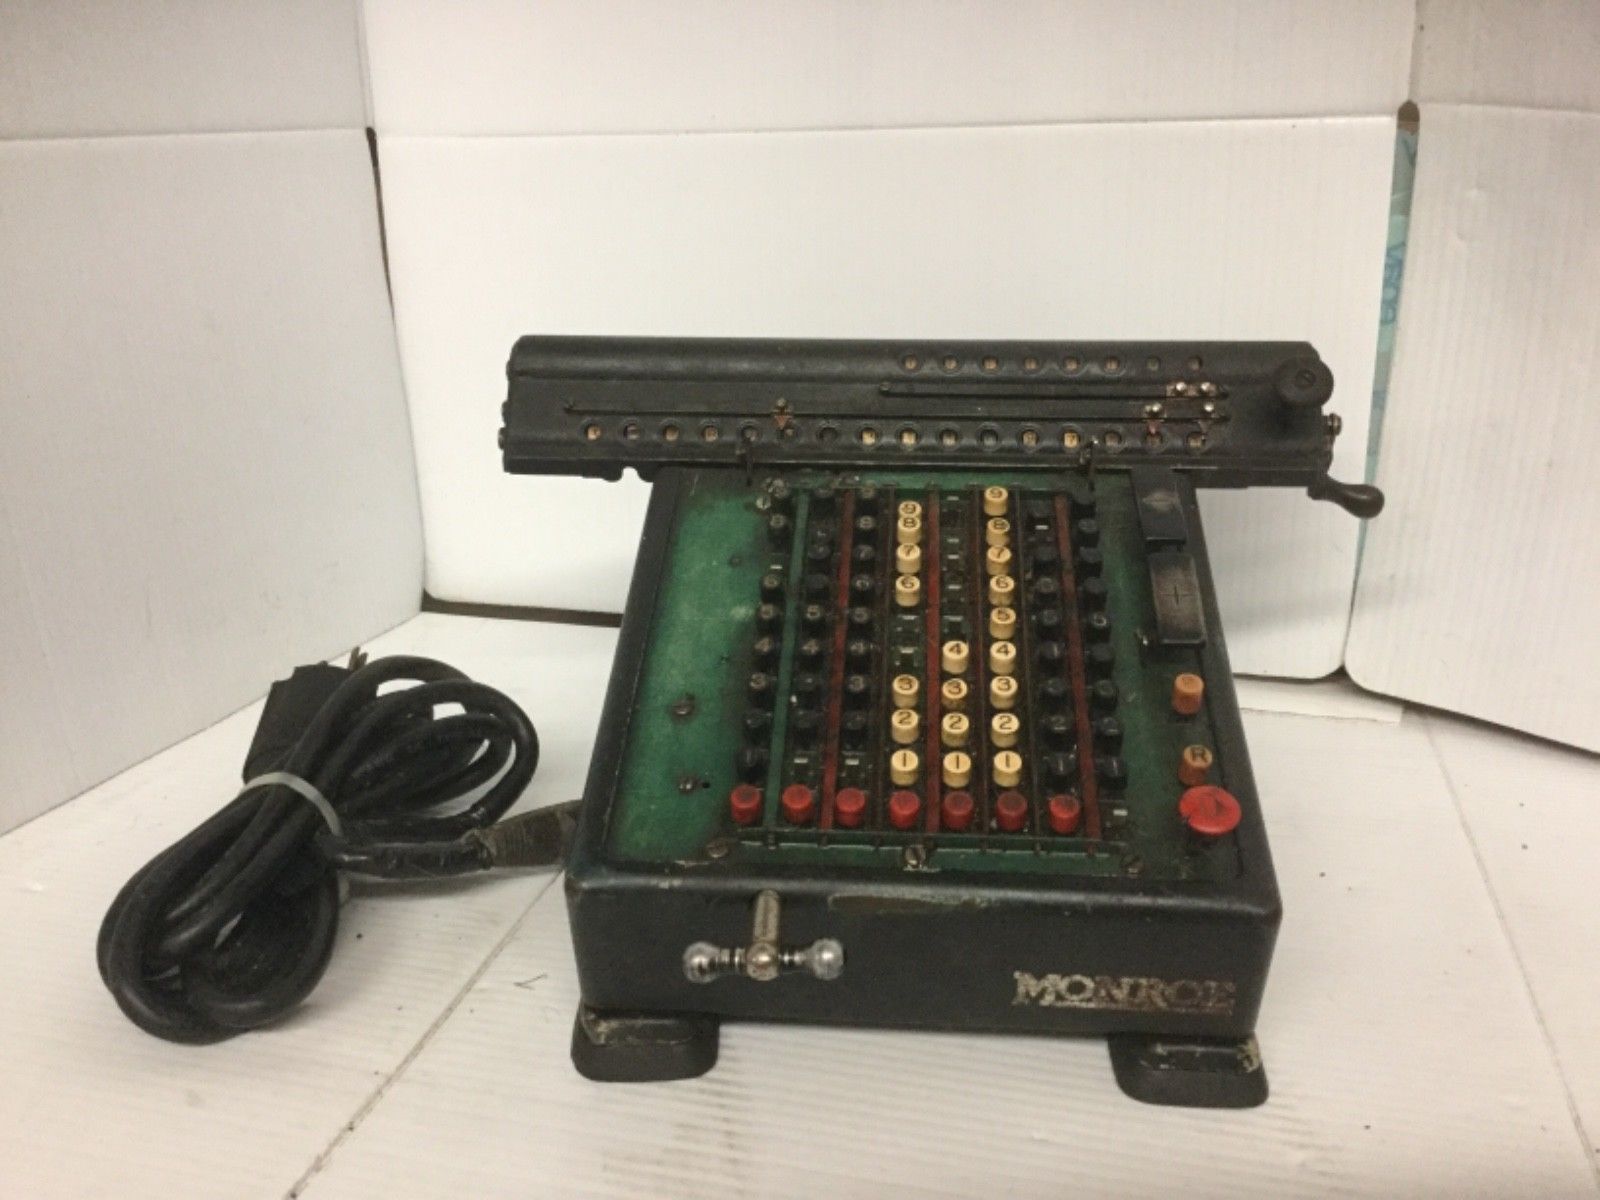 Primary image for Vintage Monroe High Speed Adding Calculator Hand Crank and Electric Parts or Rep